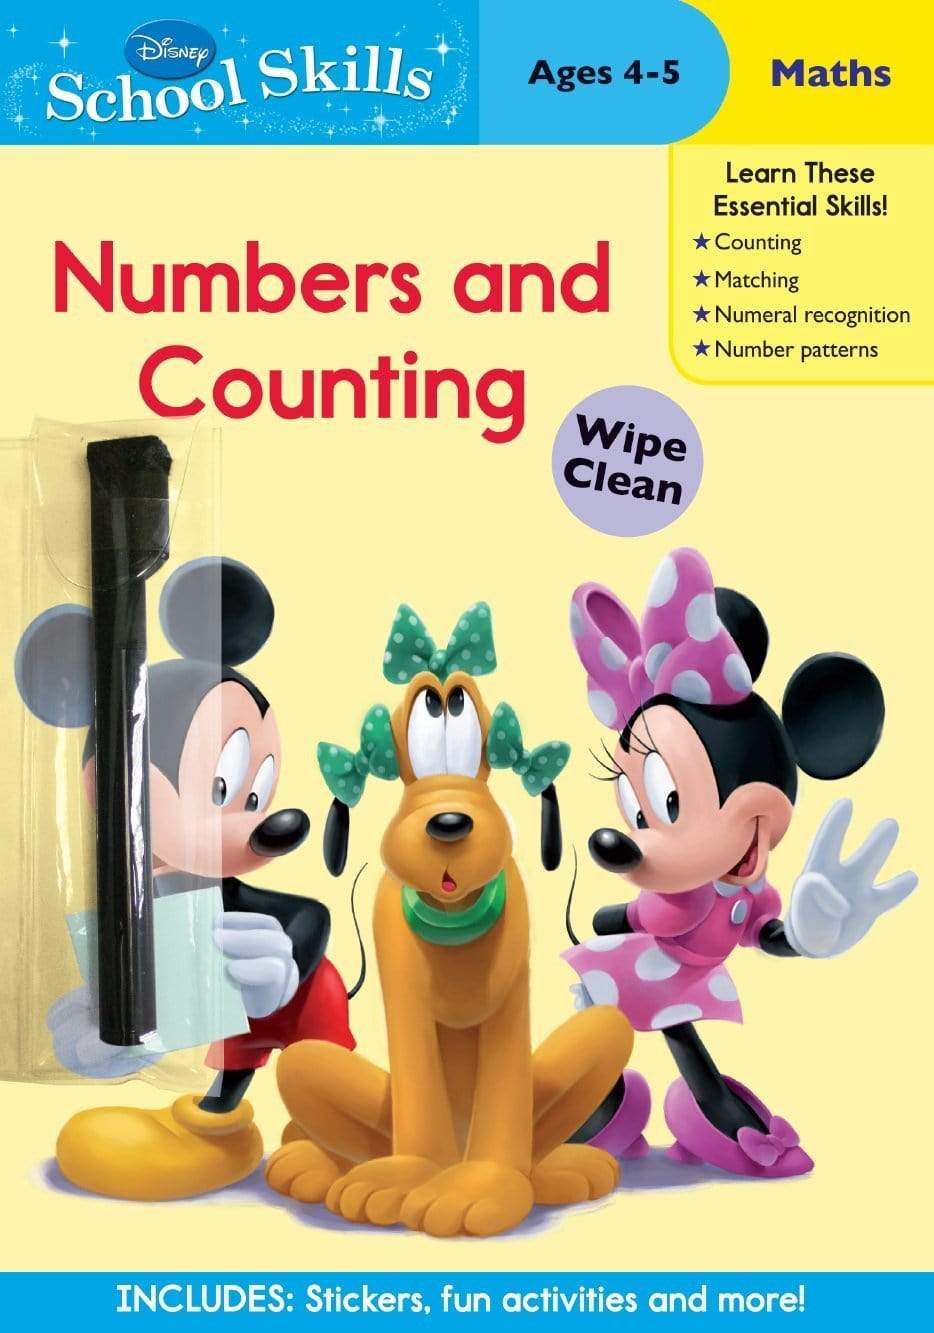 Disney School Skills: Numbers and Counting